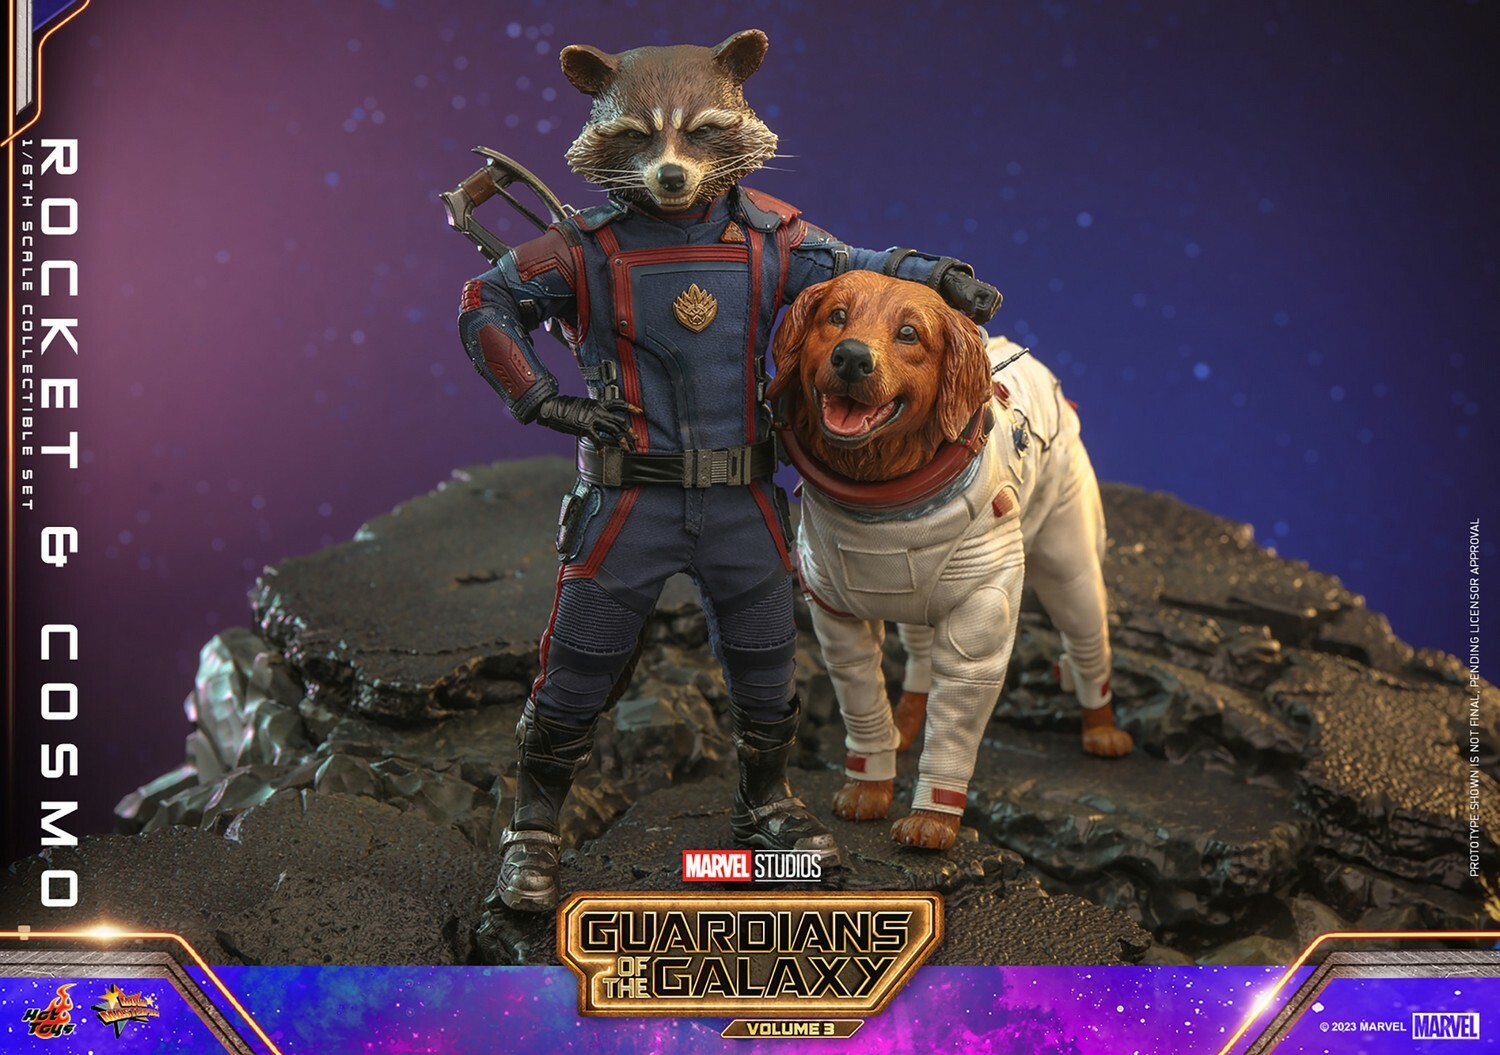  Marvel: Guardians of the Galaxy Vol. 3 - Rocket and Cosmo 1:6 Scale Figure